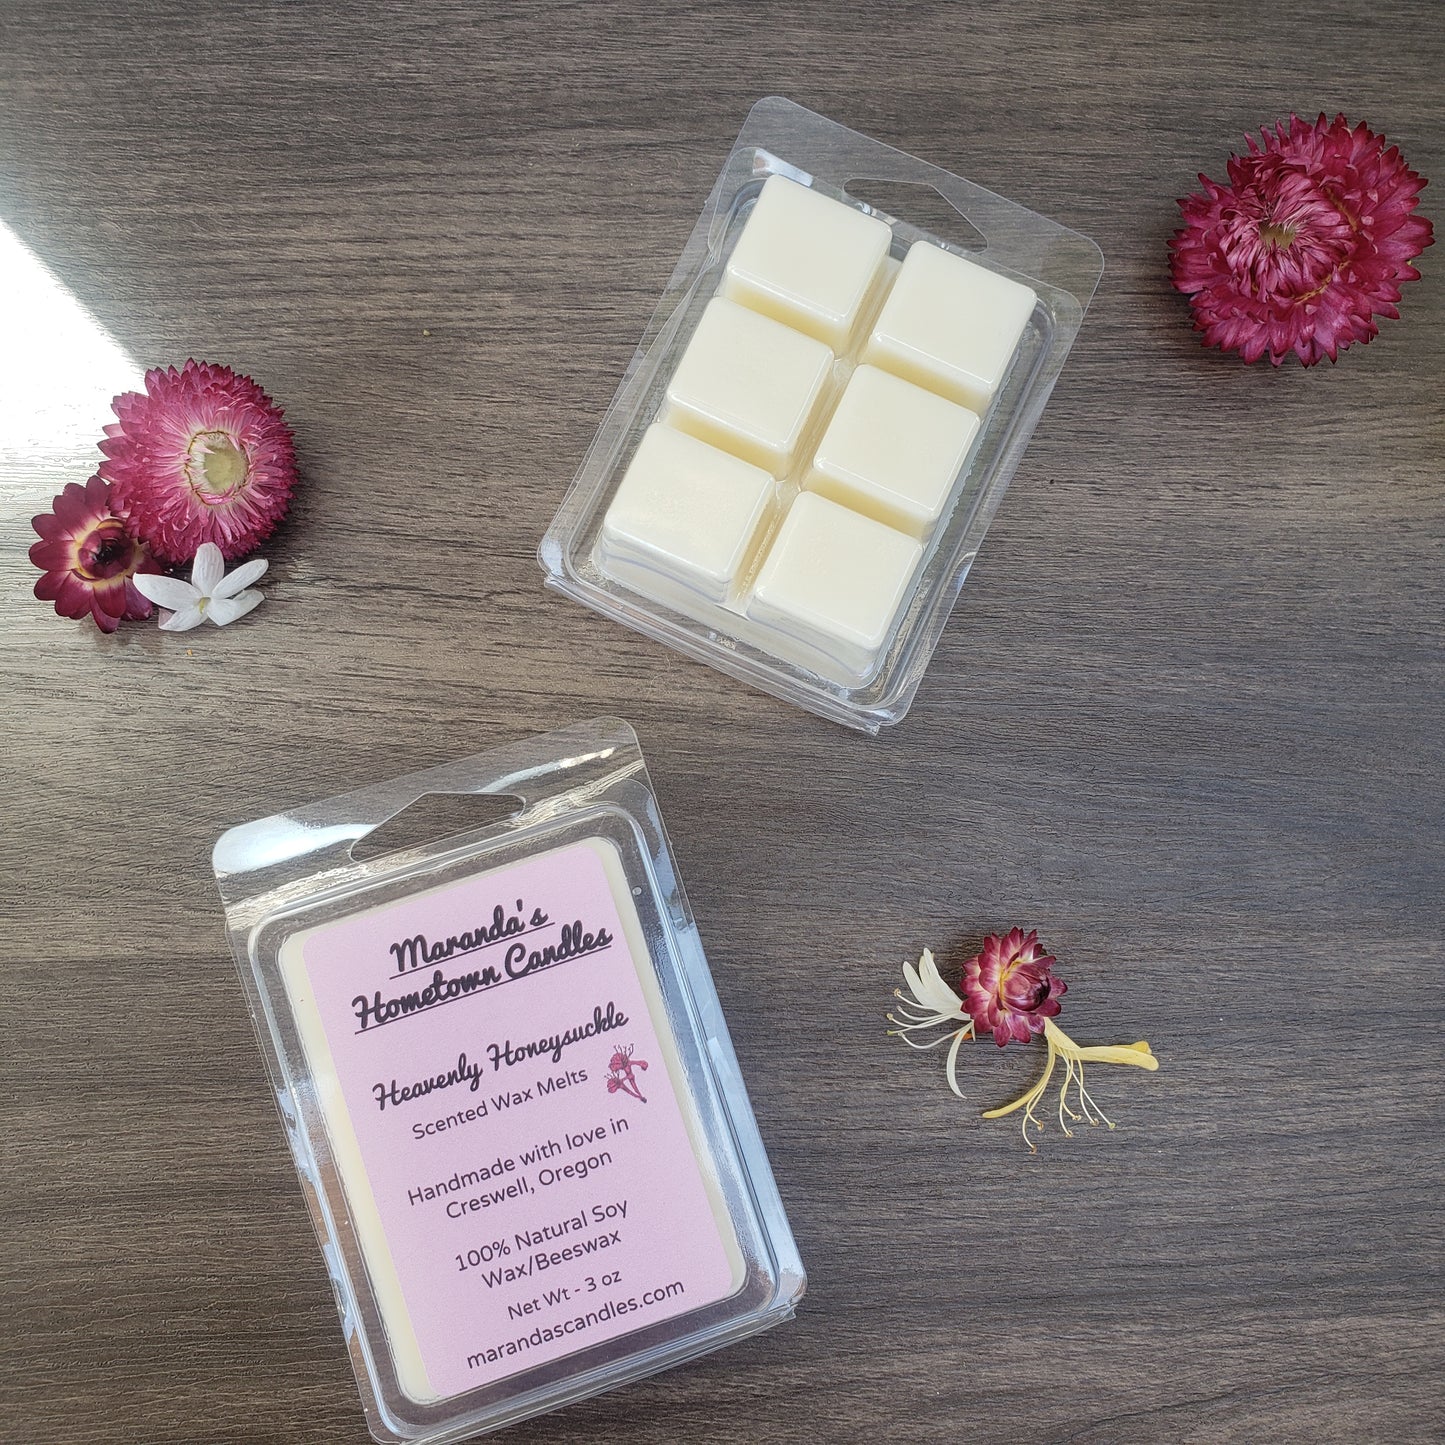 Heavenly Honeysuckle Scented Soy Wax Candles and Wax melts